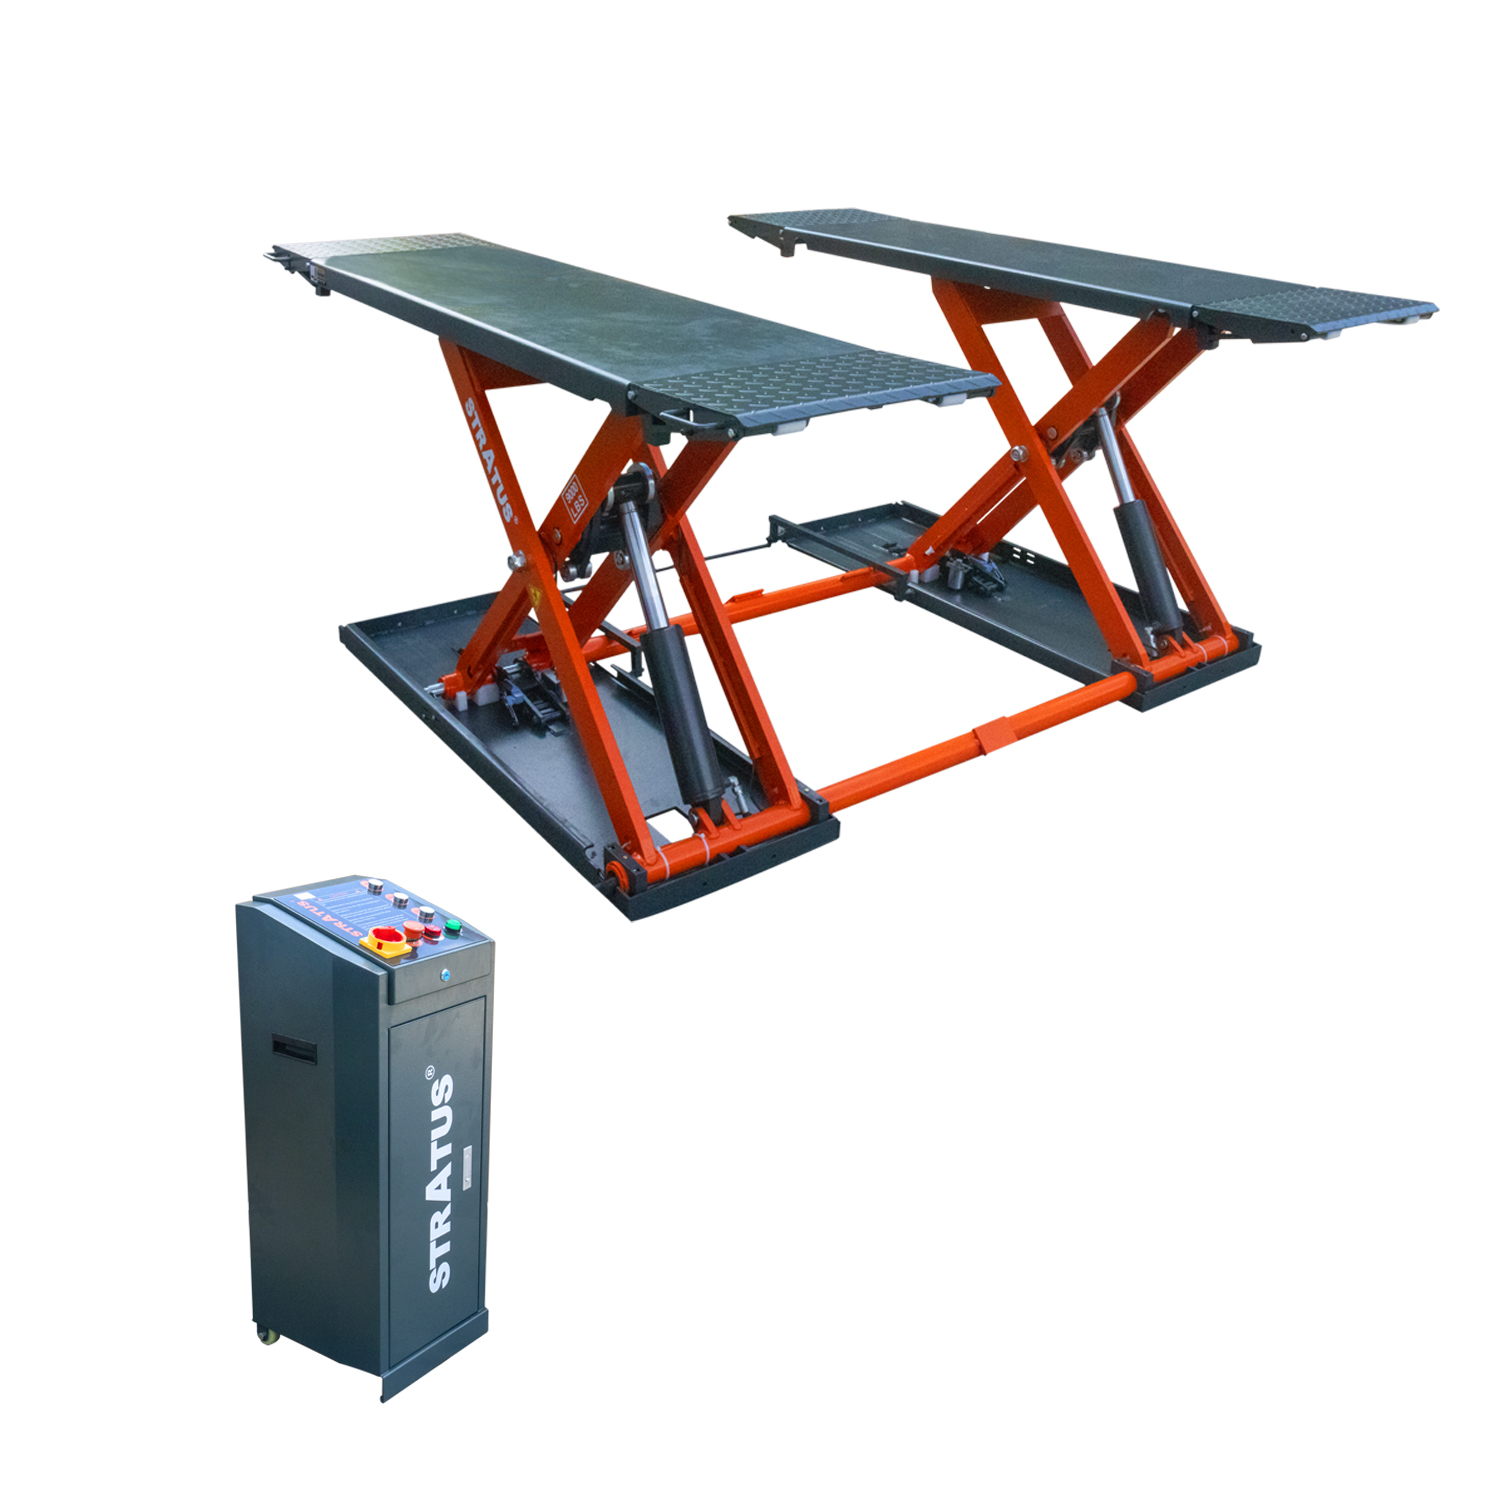 The Stratus SAE-MS9000X Open Center Mobile Mid Rise Scissor Car Lift is just the tool you need. With a 9,000 lbs capacity, there is not much it cannot lift. Its commercial-grade, extra-wide design accommodates wider vehicles with ease. Its electric safety lock release mechanism will ensure that you can safely lift and lower vehicles to your heart's content.